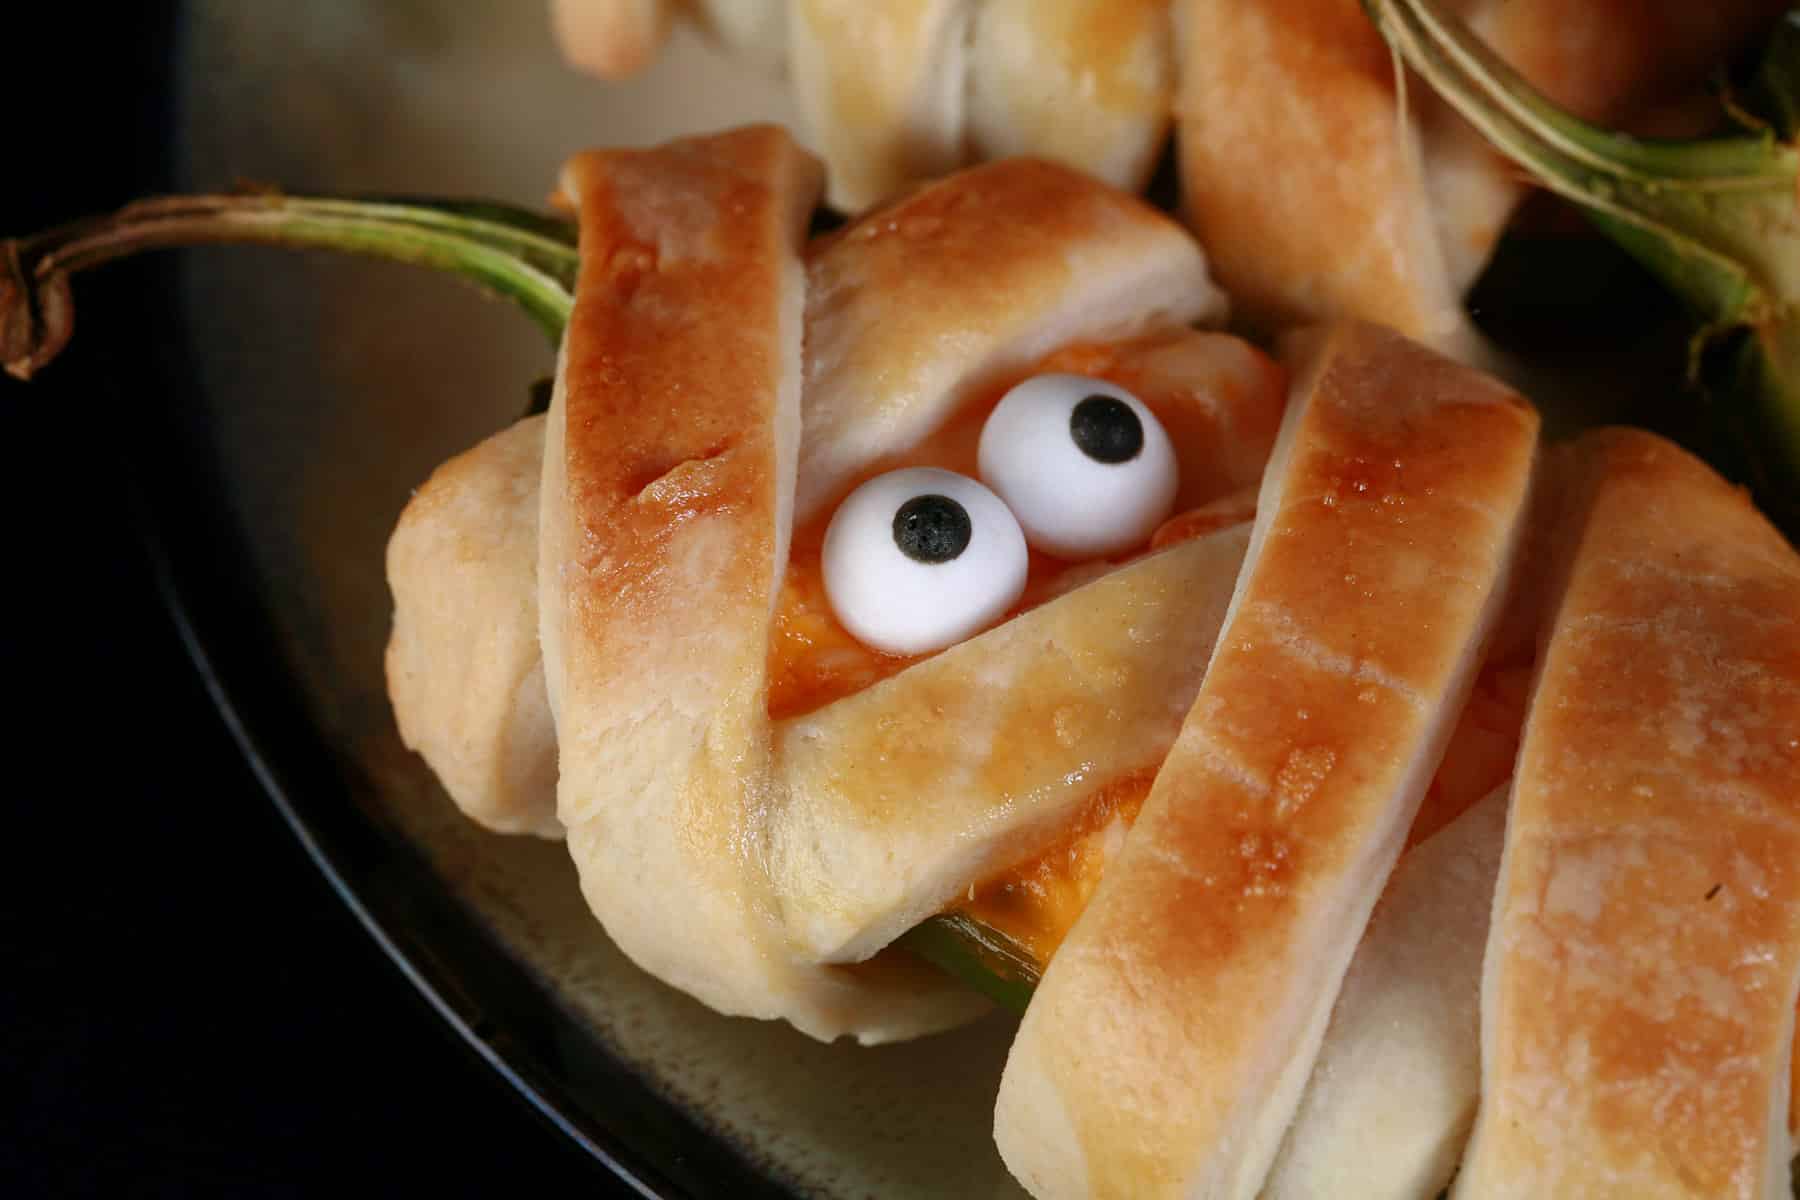 A plate of pastry wrapped Halloween mummy jalapeno poppers, each with 2 candy eyes.